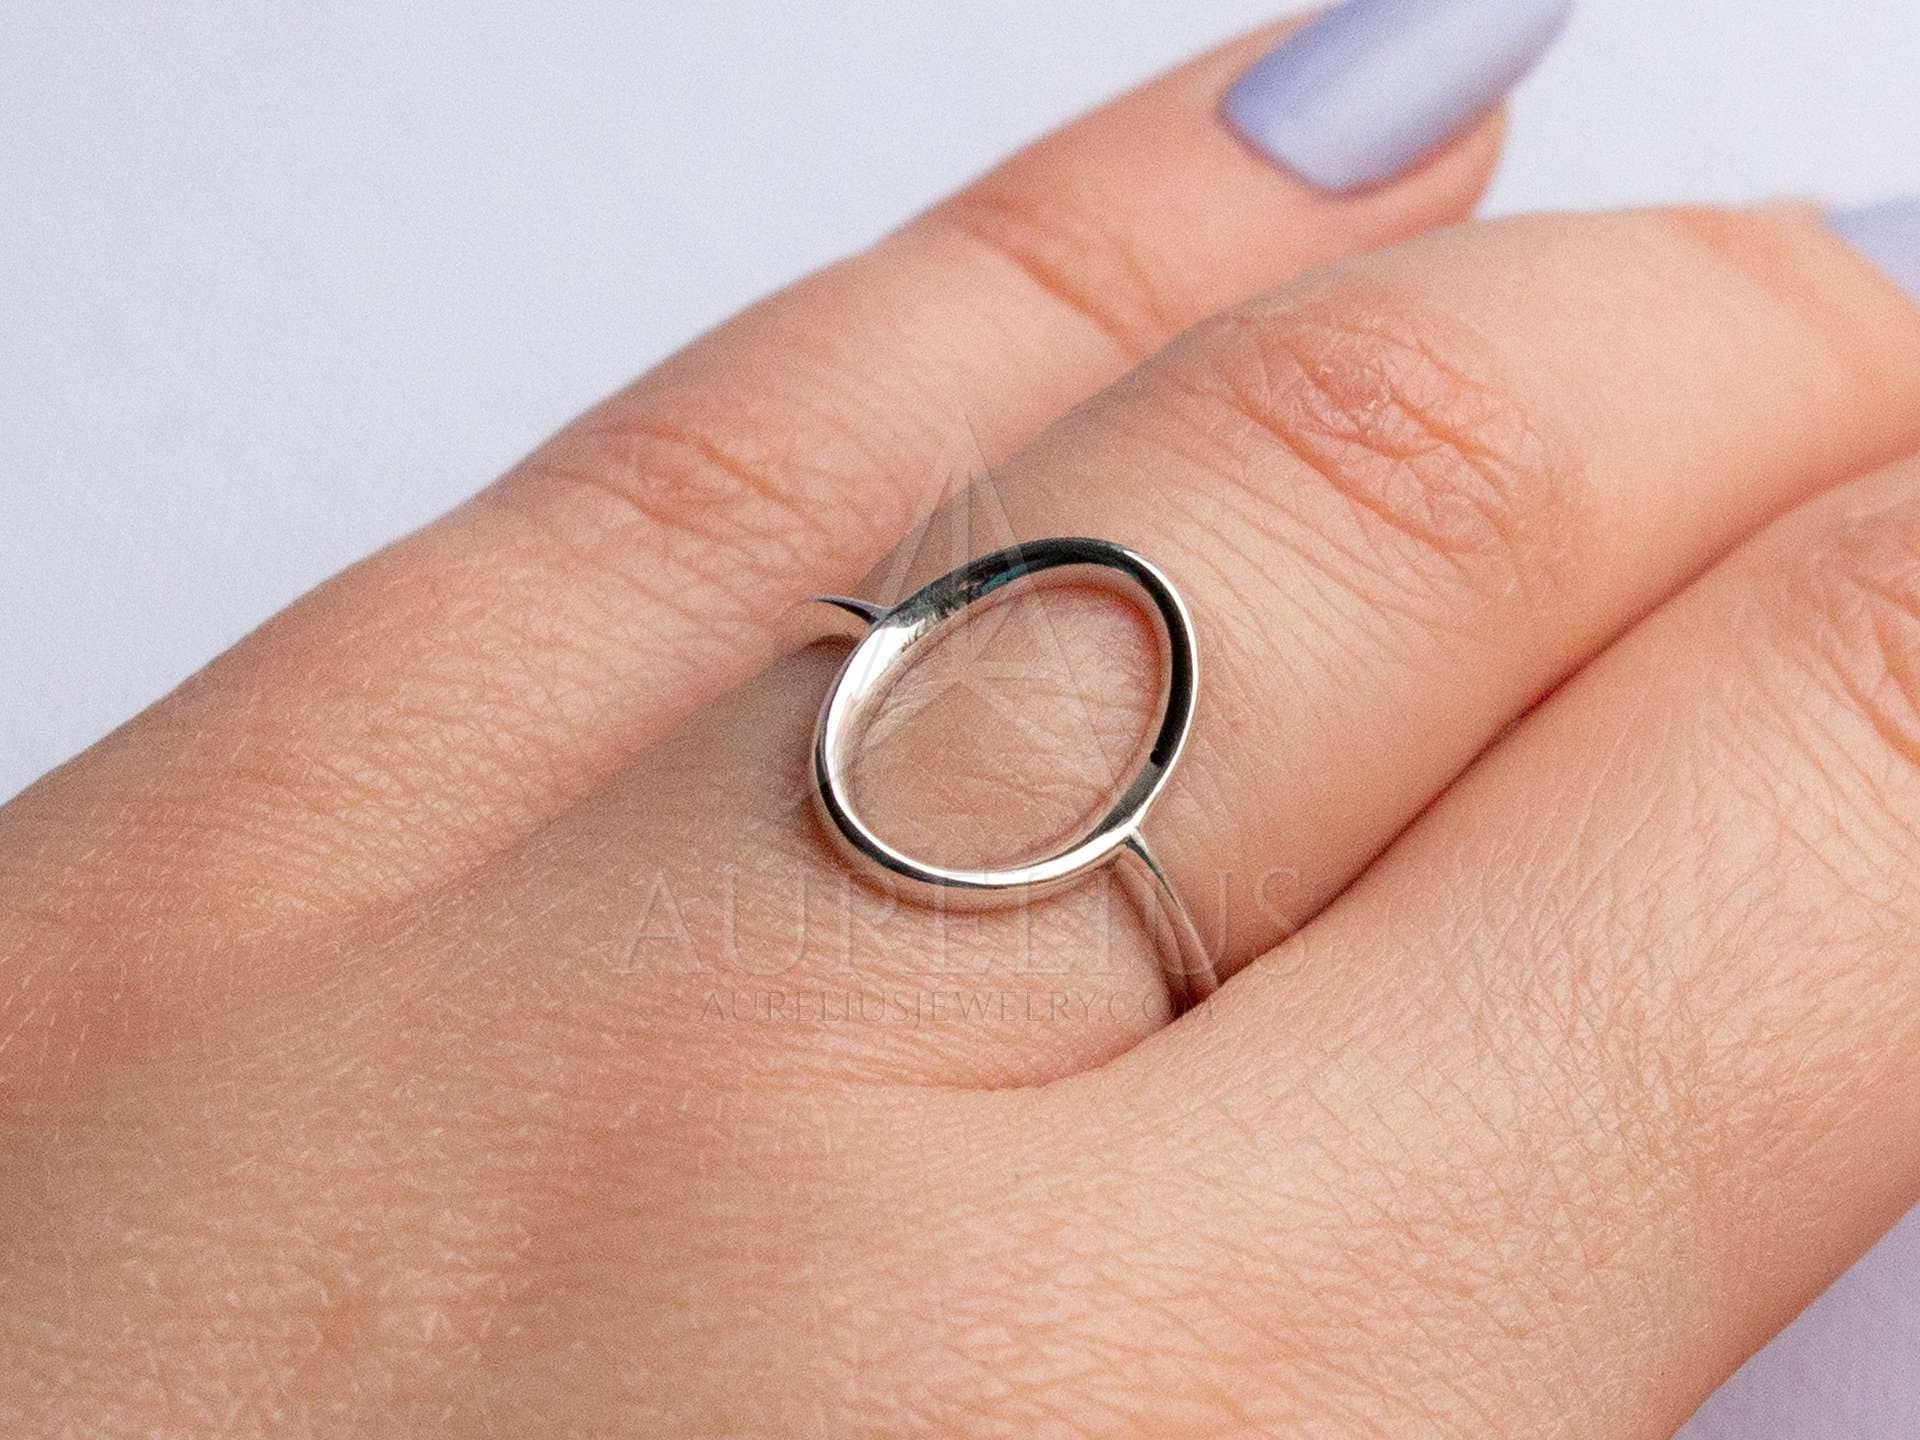 50 Small Tattoo Ideas Less is More : Wedding Ring Tattoo I Take You |  Wedding Readings | Wedding Ideas | Wedding Dresses | Wedding Theme